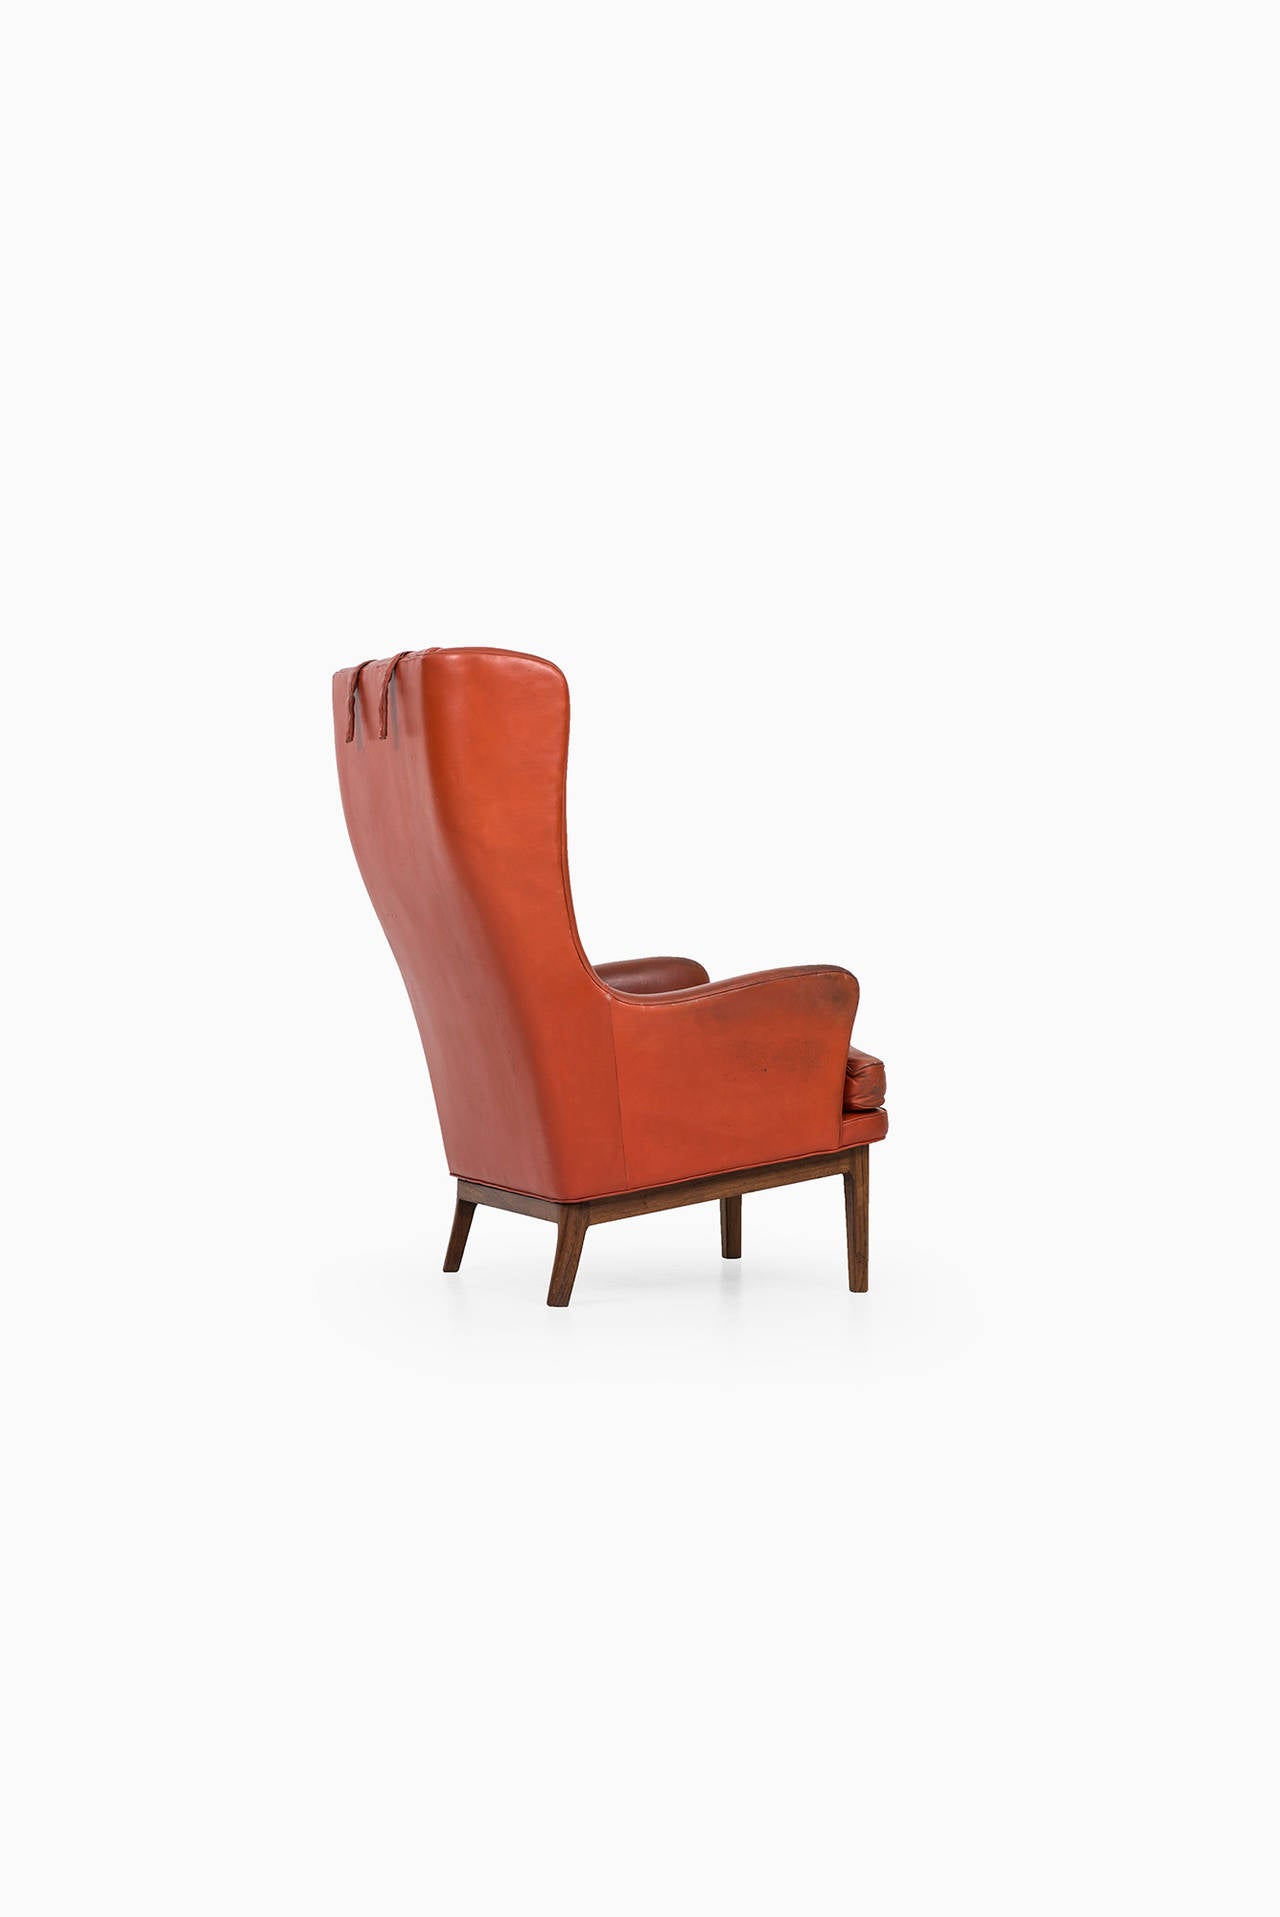 Mid-20th Century Arne Norell wingback easy chair in rosewood and leather by Norell AB in Sweden